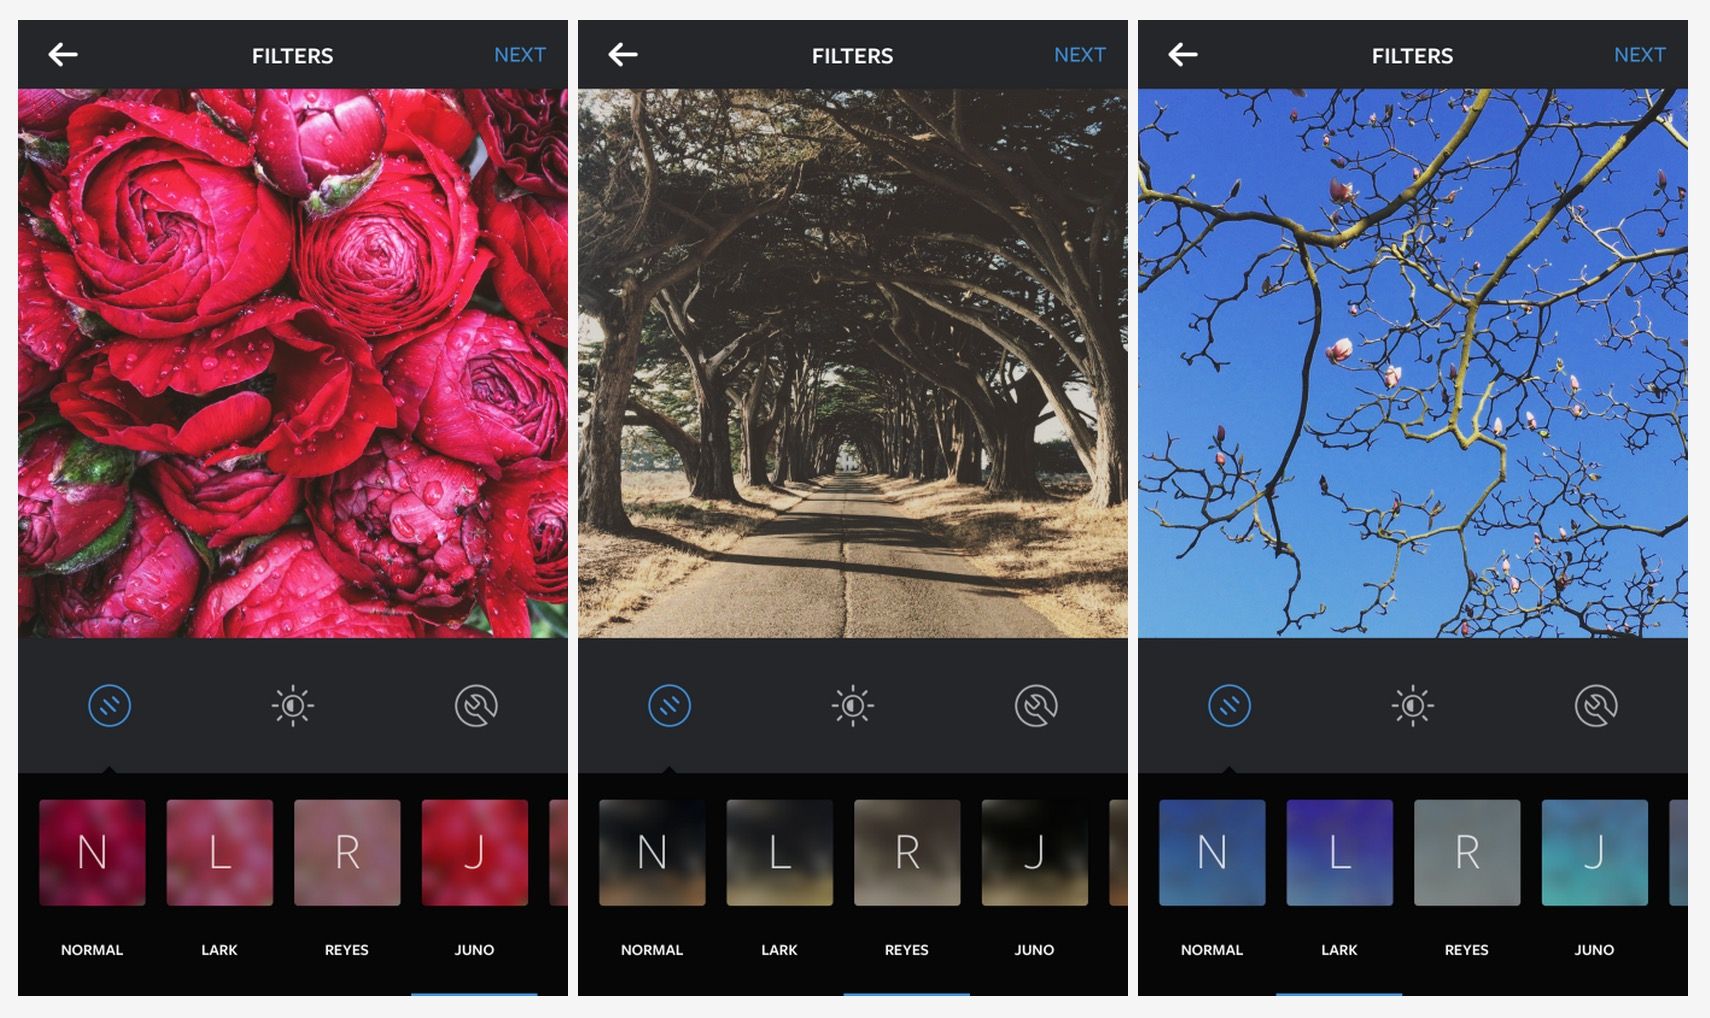 instagram adds new lark reyes and juno filters here s what they can do to your photos image 3